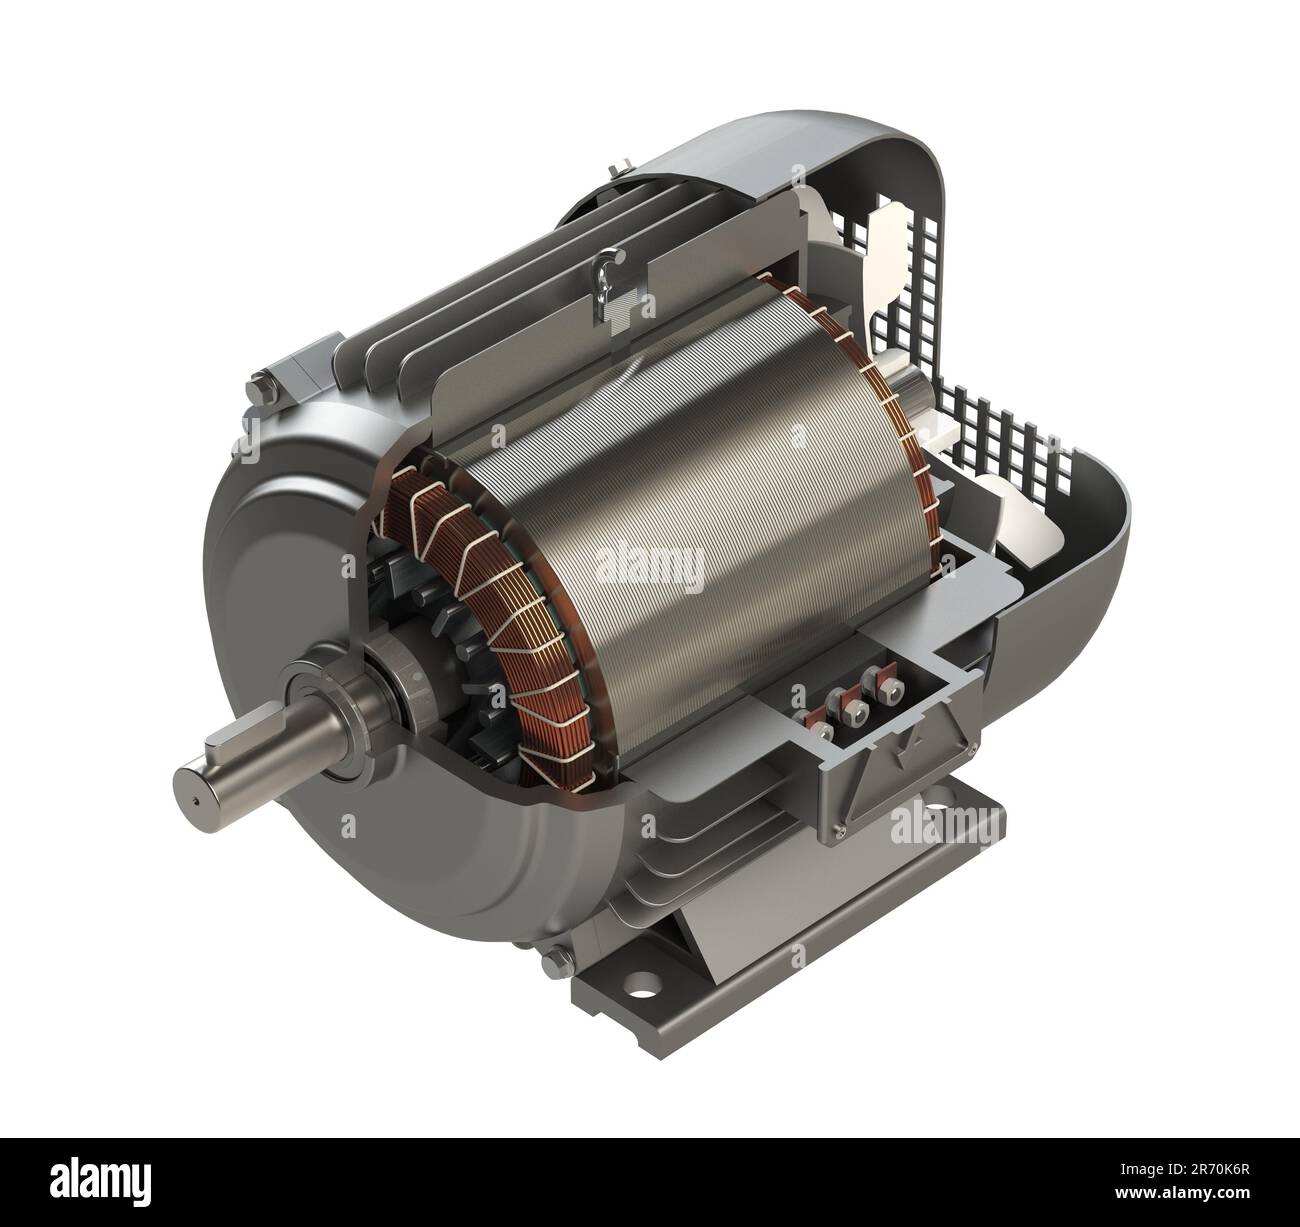 Electric motor section view Stock Photo - Alamy